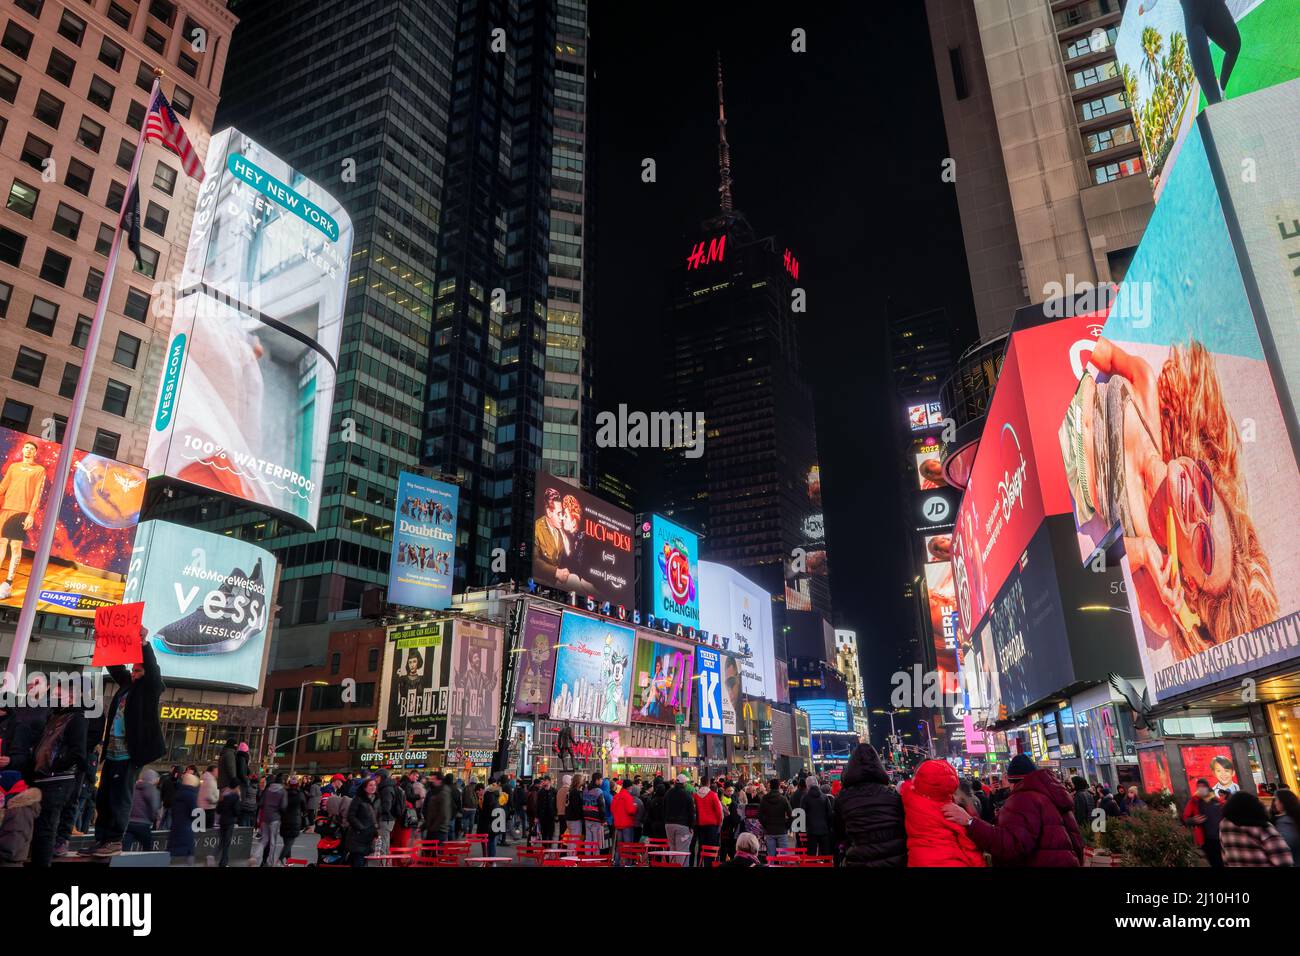 The Times Square at night, New York City, United States Stock Photo